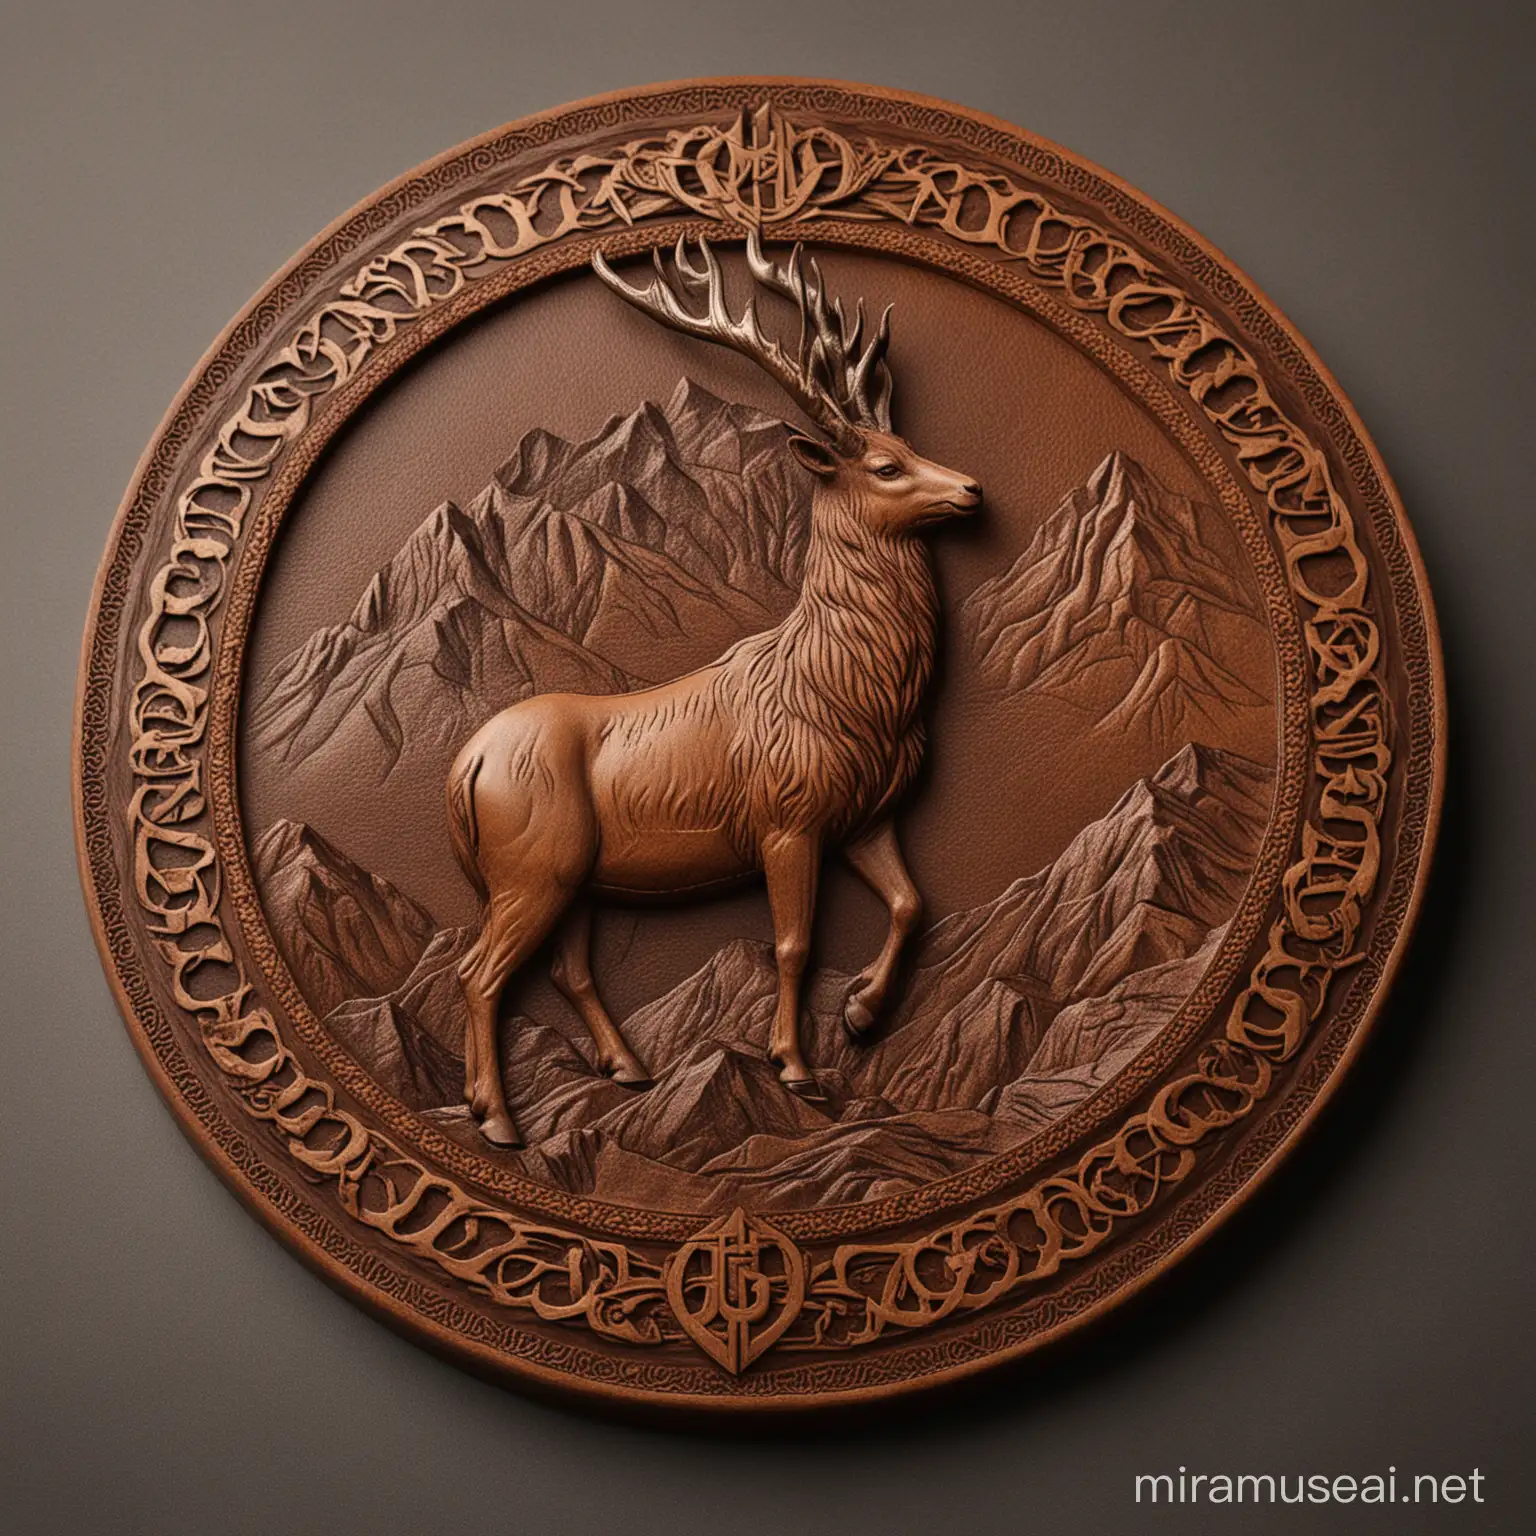 Design a circular emblem where a majestic Markhor stands atop a rugged mountain peak, symbolizing strength and endurance. Surround the emblem with intricate leather tooling patterns, echoing the craftsmanship of Leather Shire products. Incorporate the brand name "Leather Shire" in bold, elegant typography, curved along the bottom of the emblem.